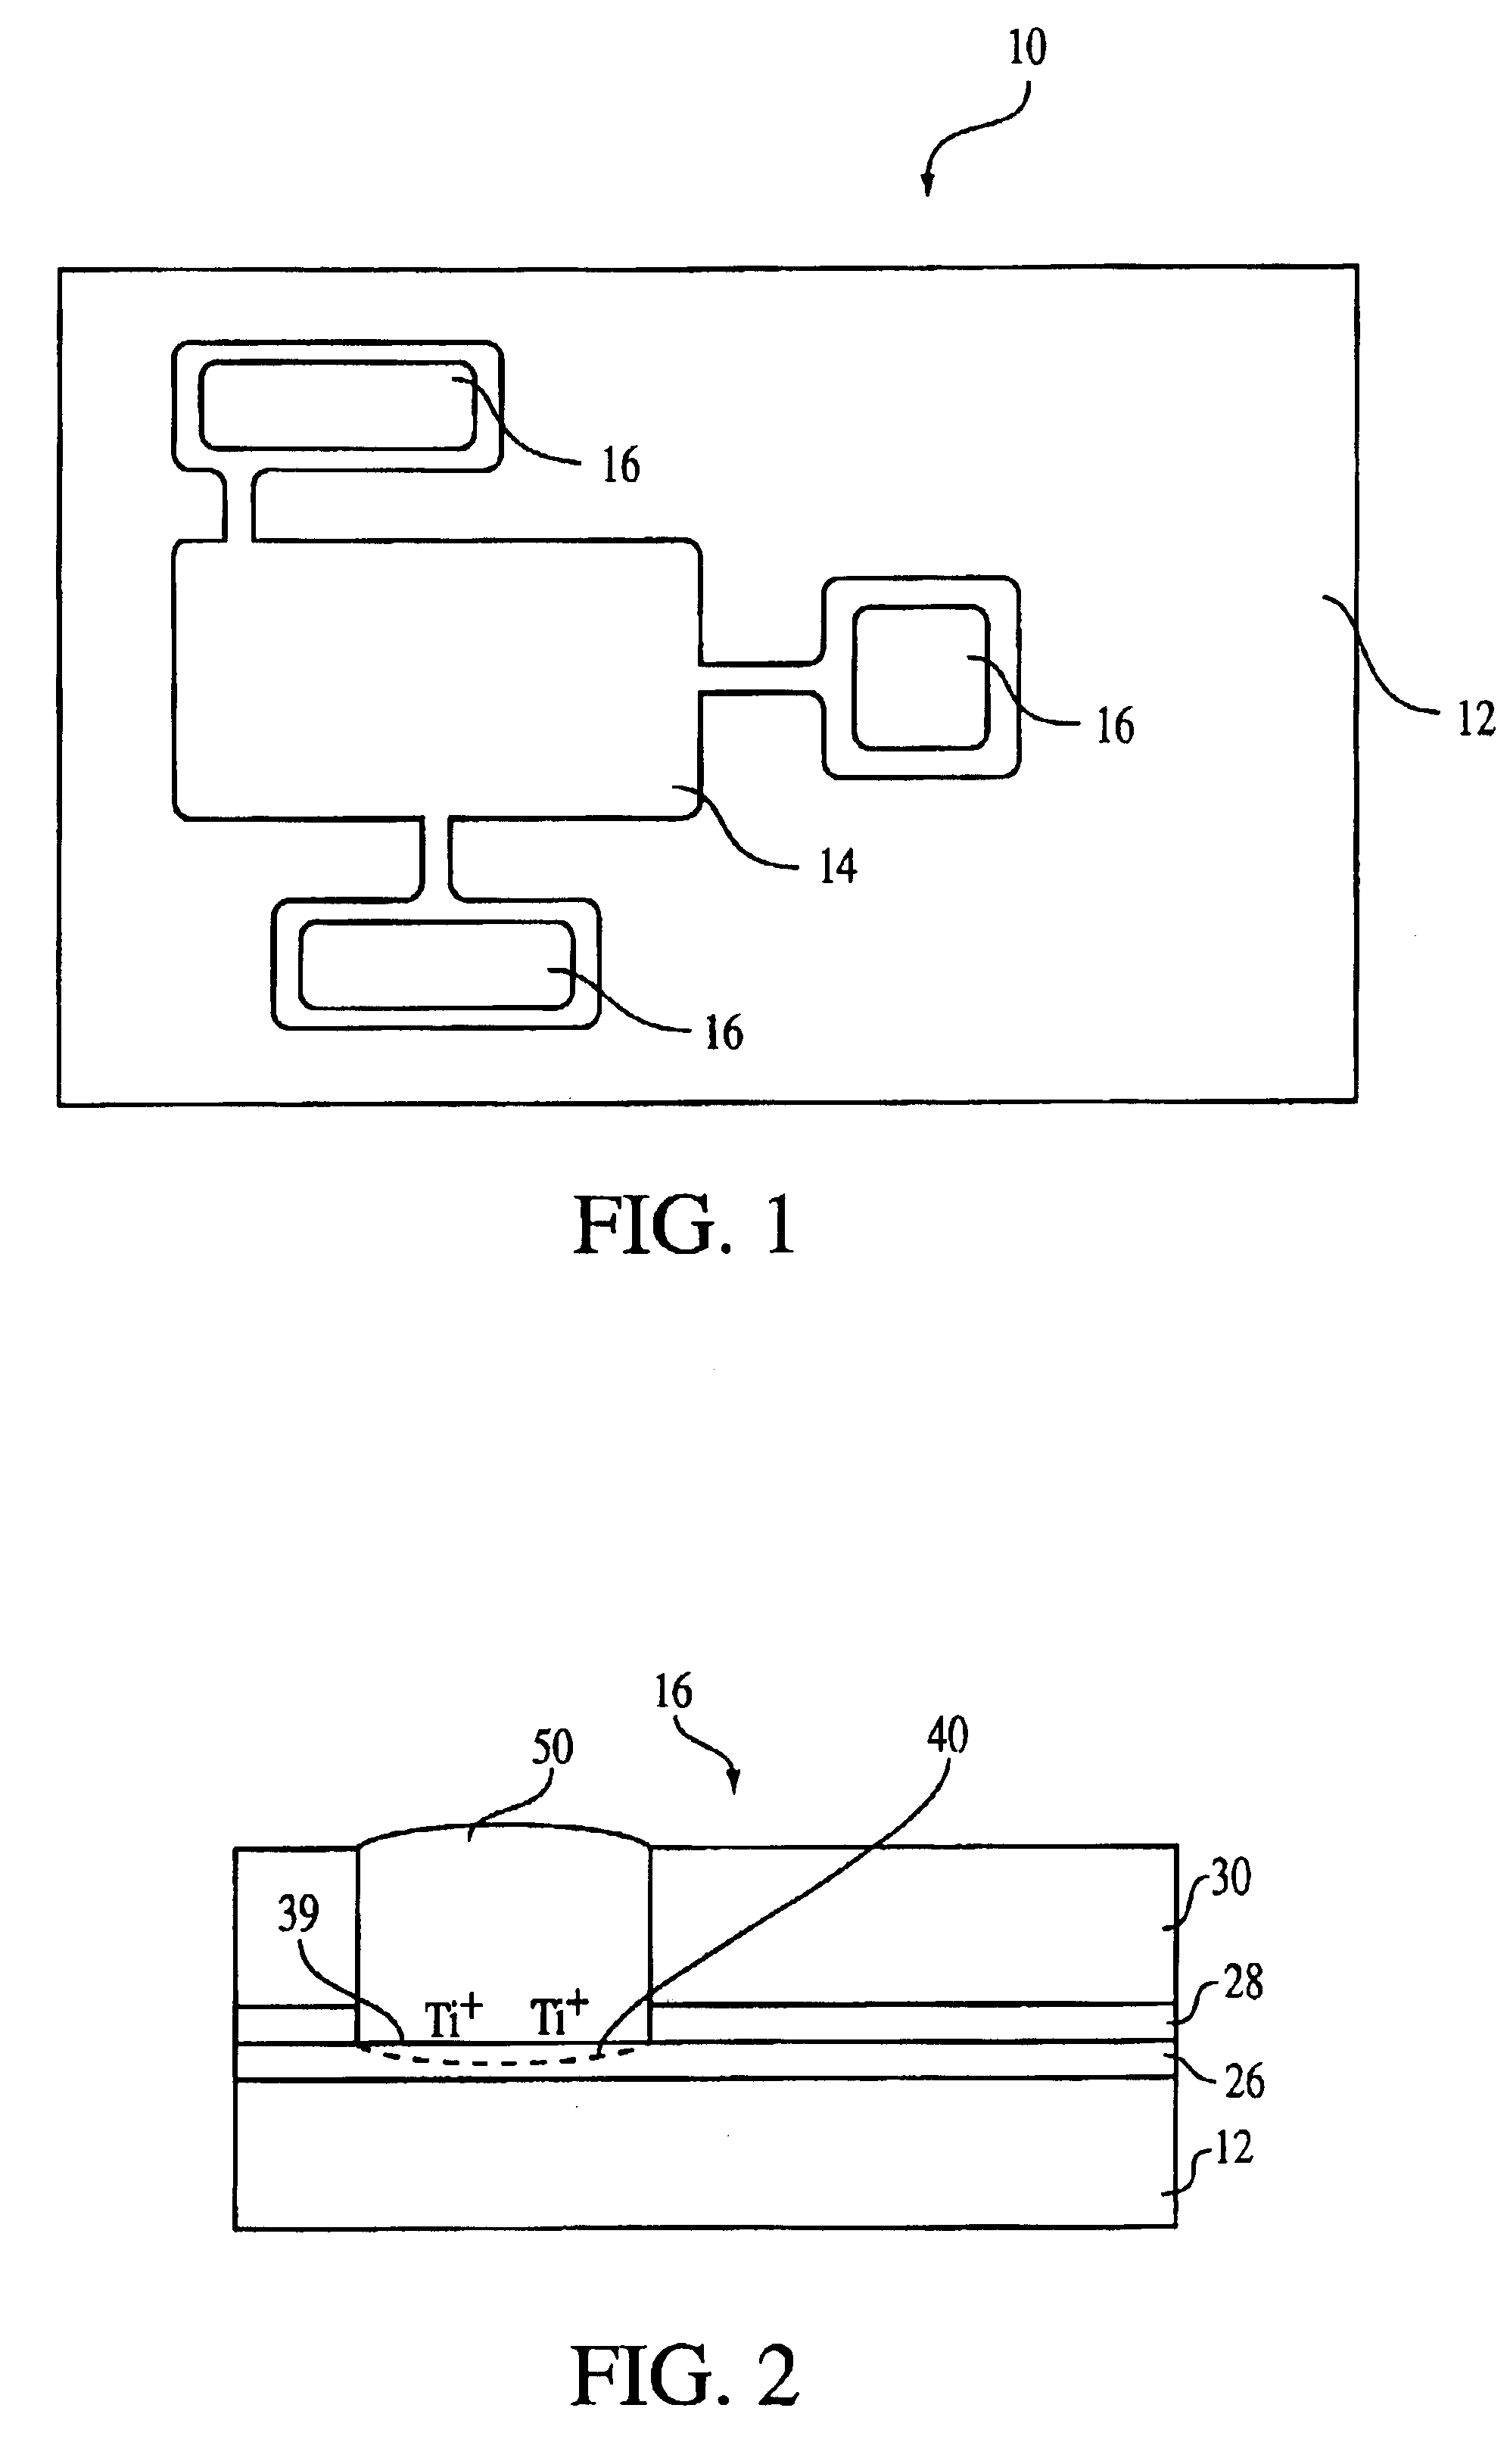 Method of forming a multi-layered copper bond pad for an integrated circuit